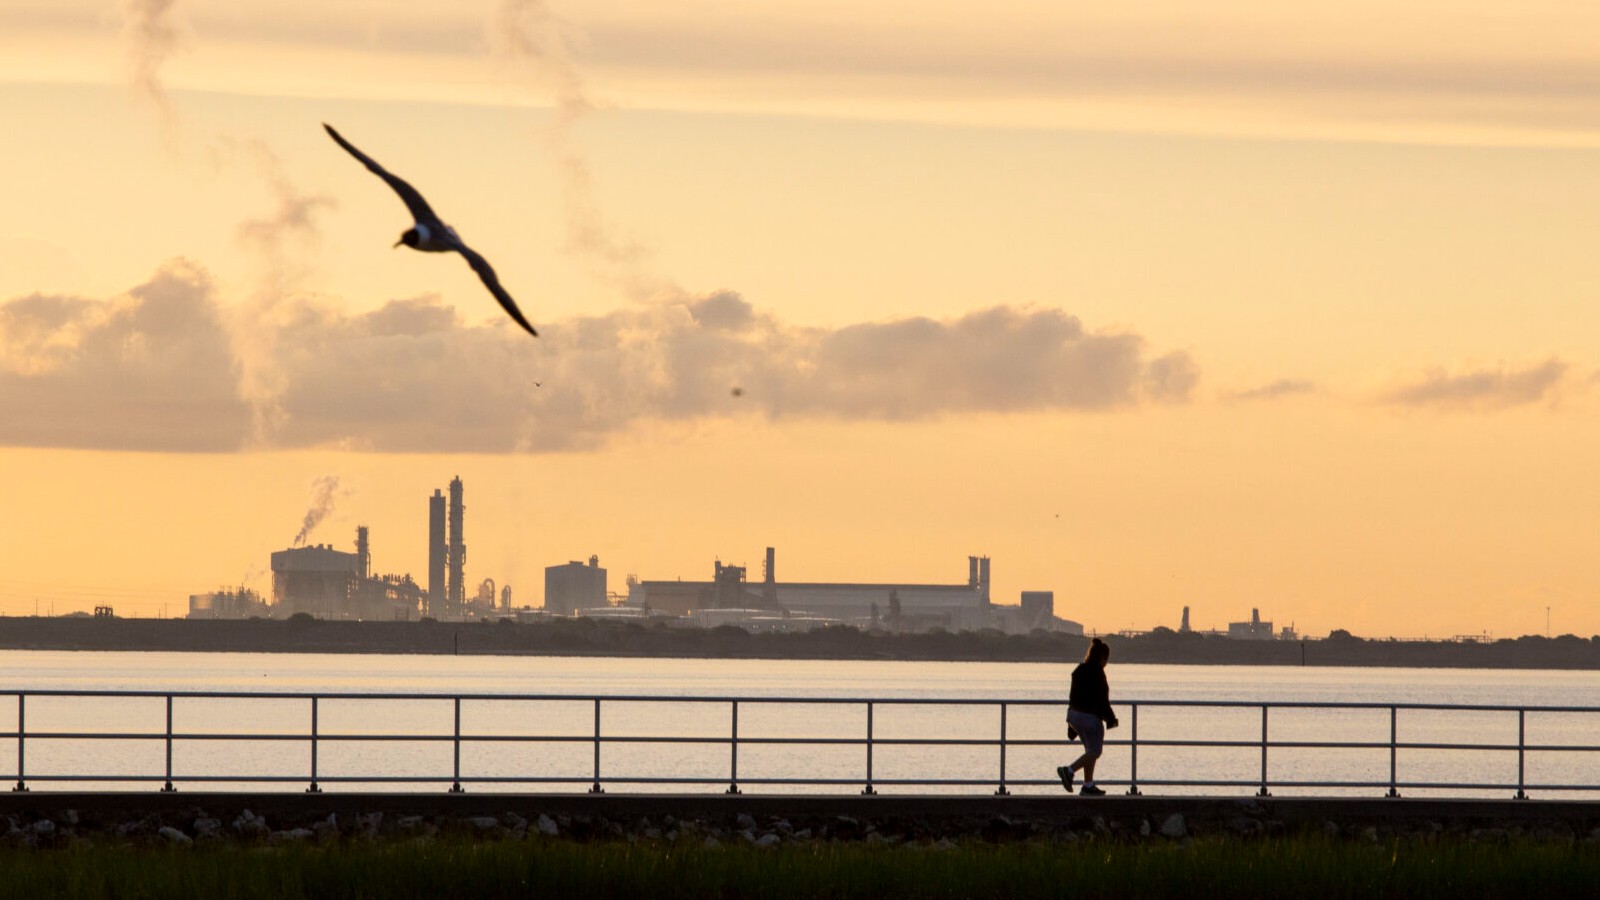 A view of a bay with a factory in the background against an orange sky, as a person walks on the water's edge and a bird flies above.